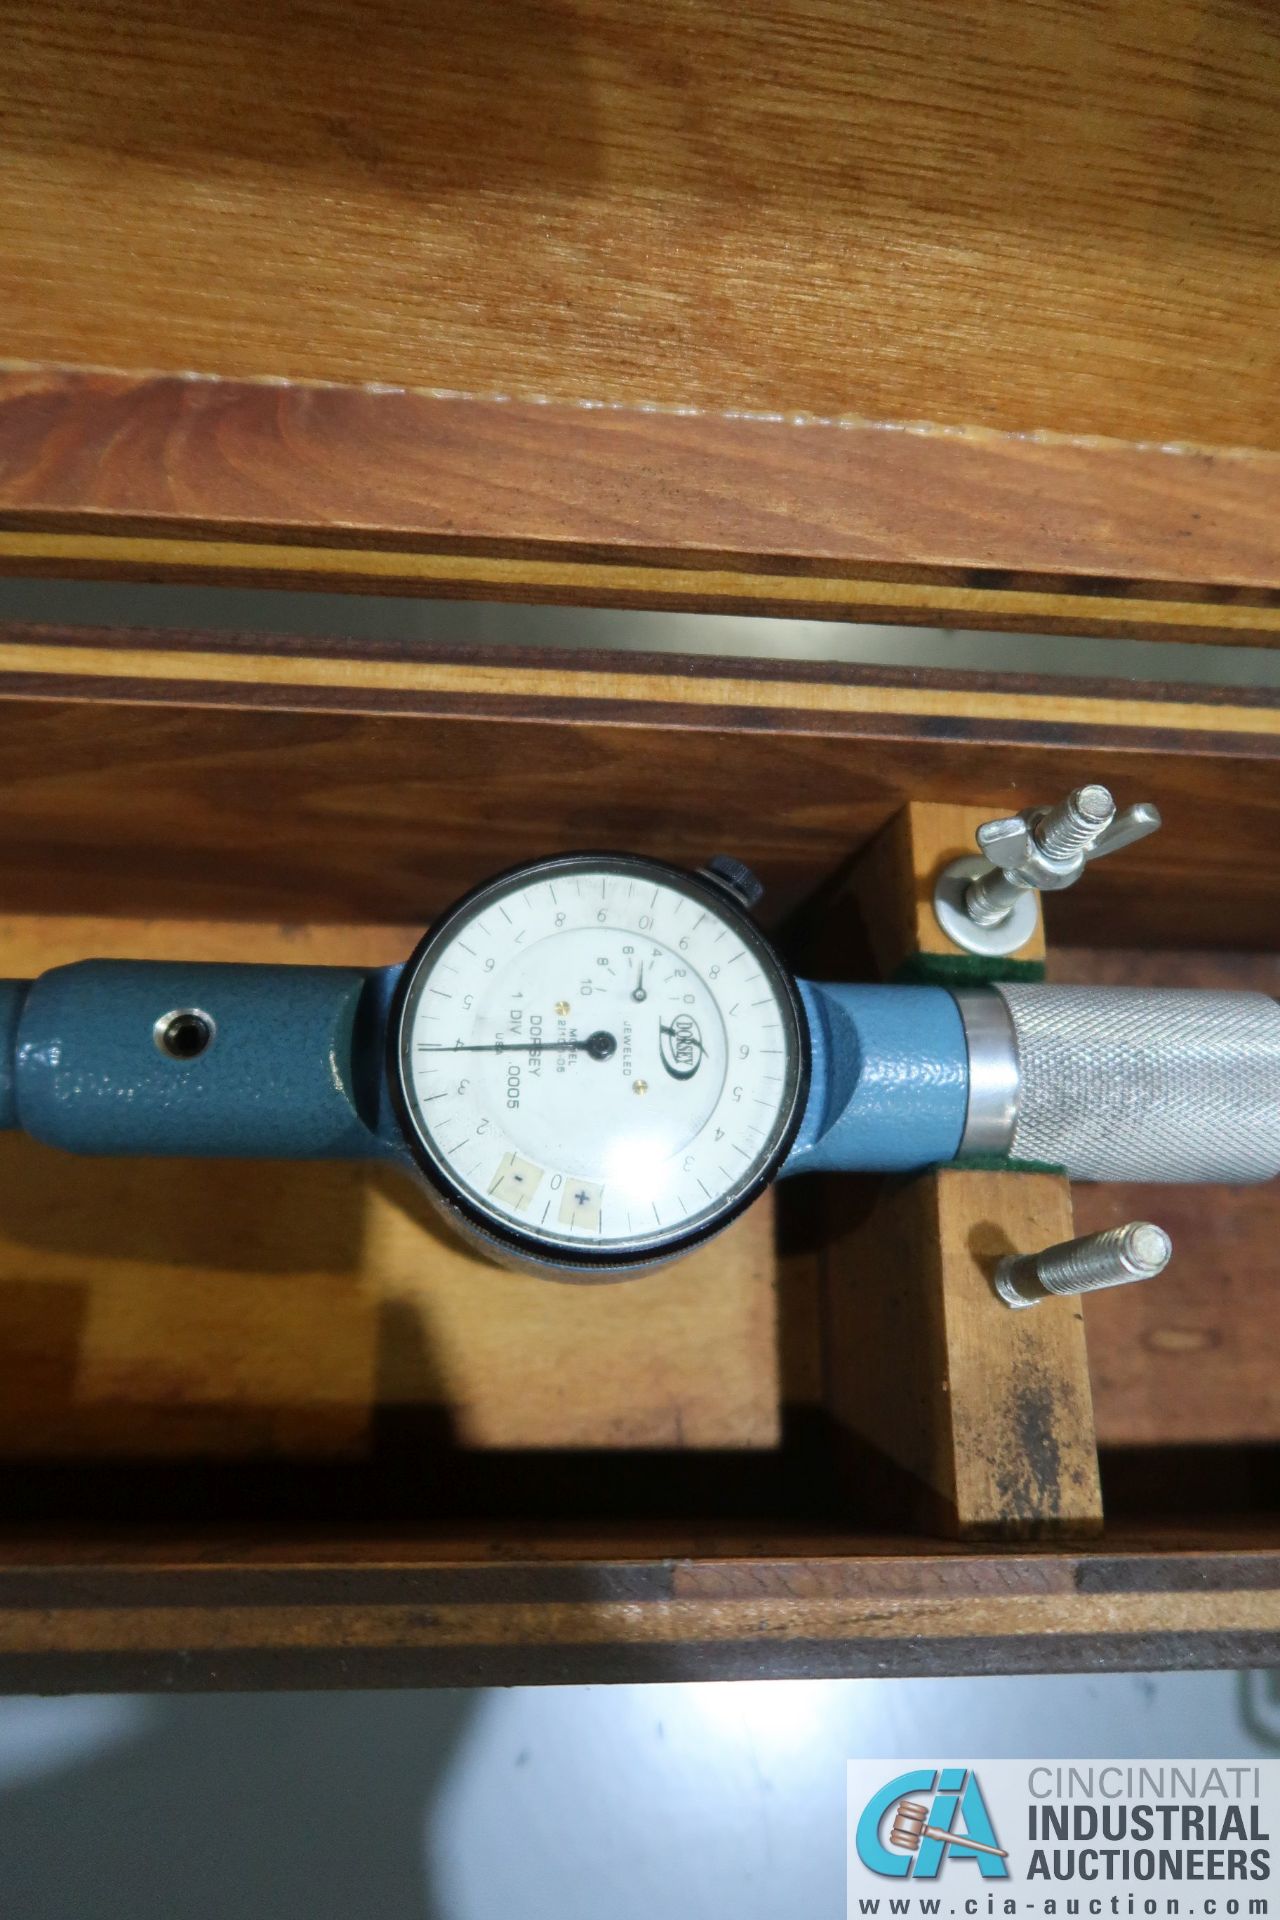 58" LONG STANDARD GAGE CO. DIAL BORE GAGE WITH STANDARD NO. 5 DIAL GAGE - Image 2 of 3